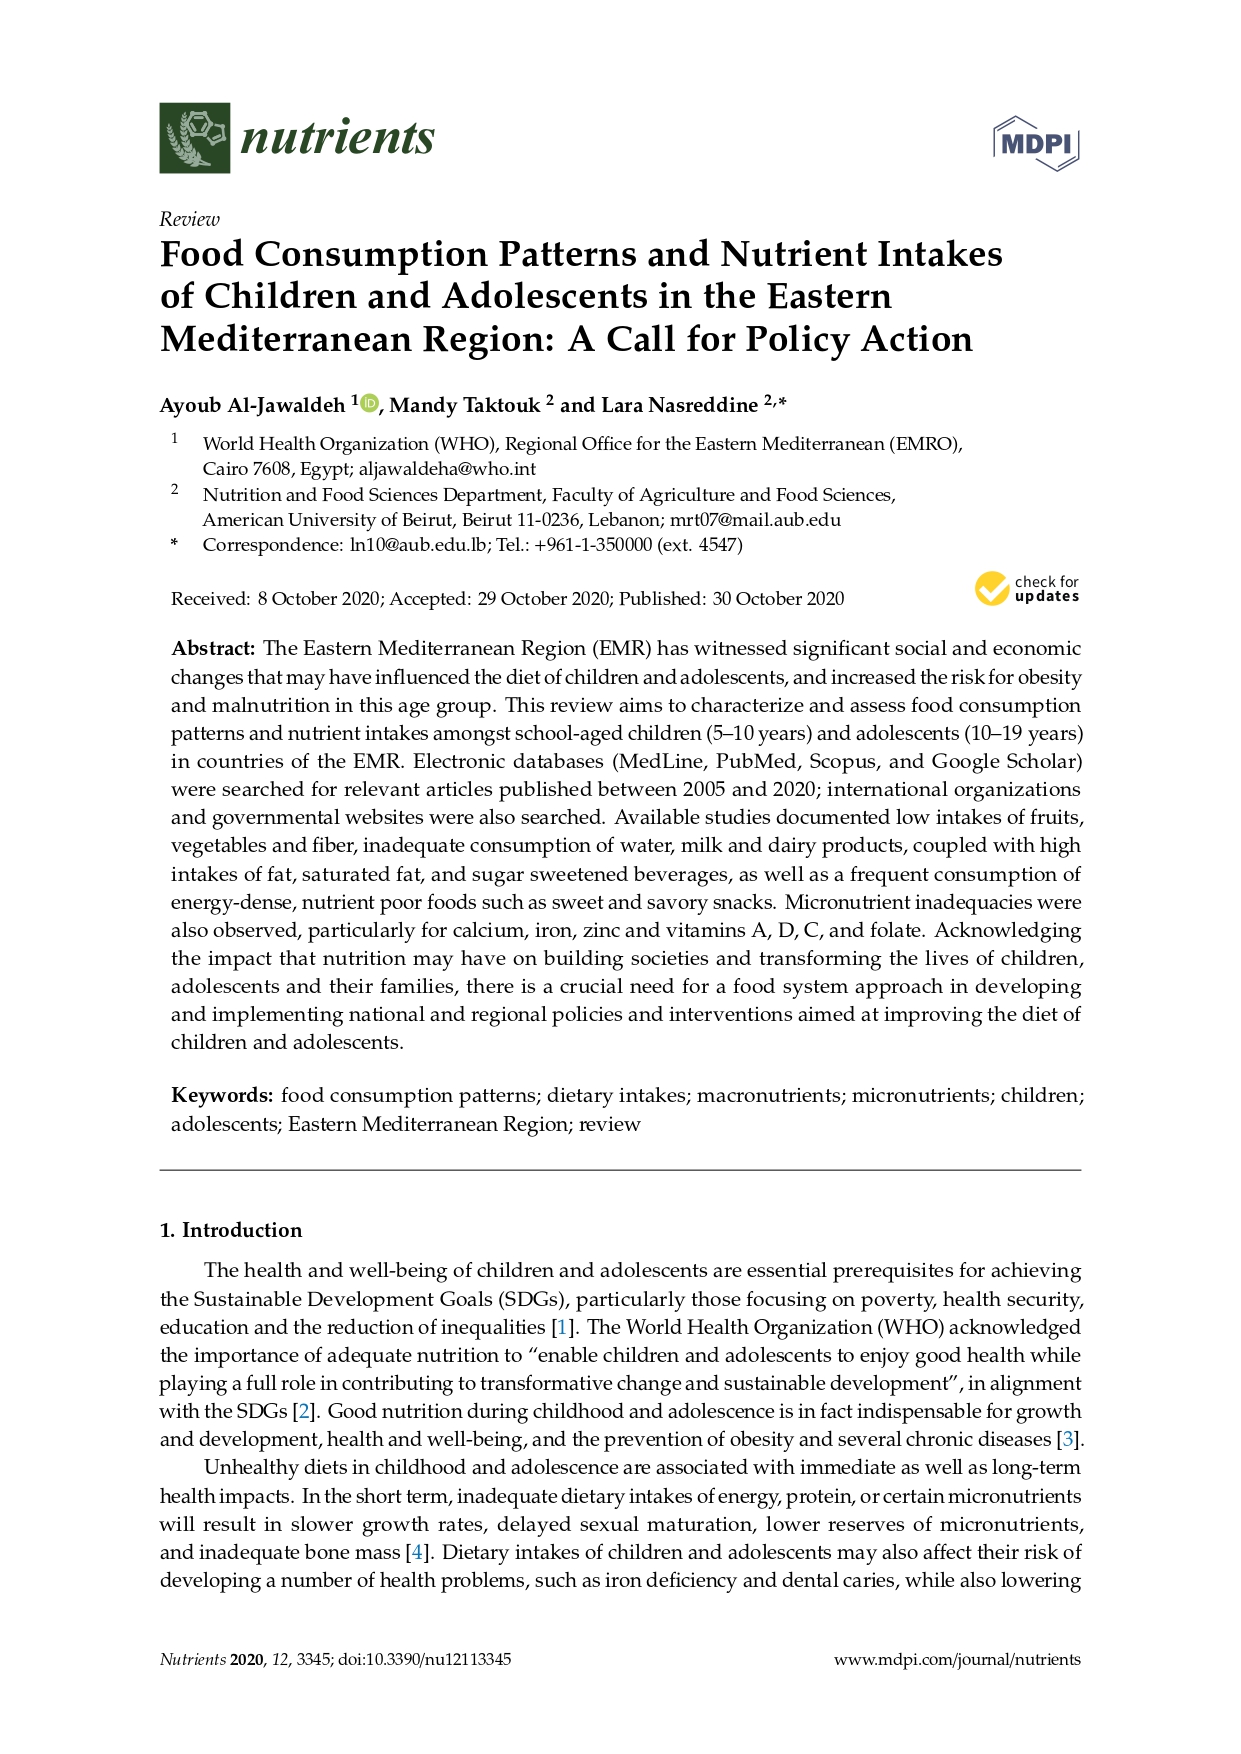 food_consumption__patterns_and_nutrient_intakes_of_children_and_adolescents_in_the_eastern_mediterranean_region_a_call_for_policy_action_page-0001